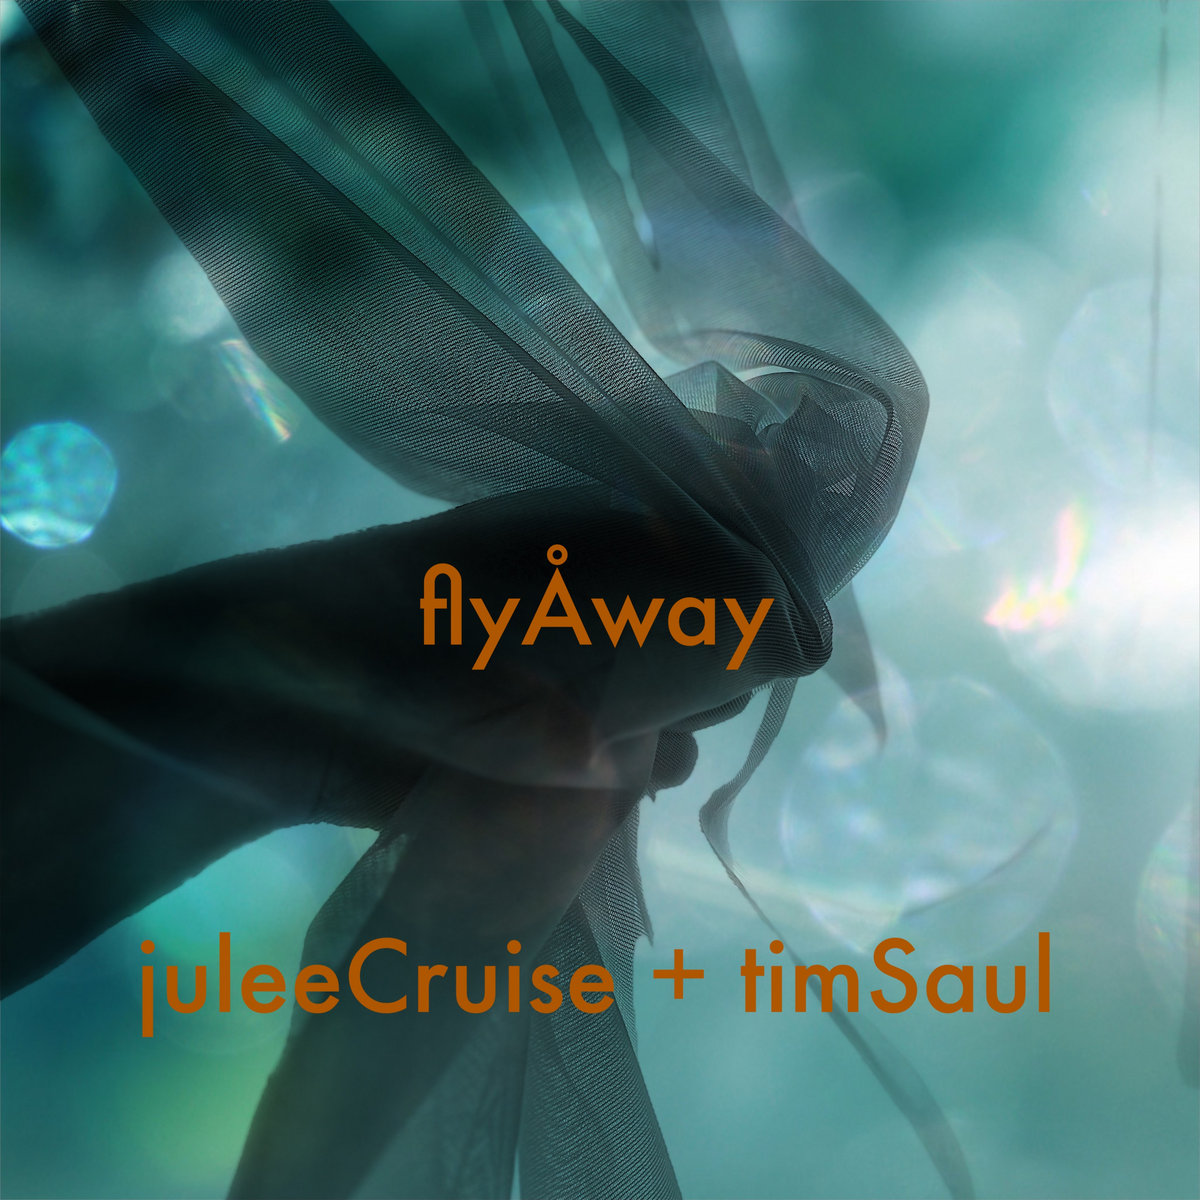 LISTEN: “Fly Away” by Julee Cruise and Tim Saul